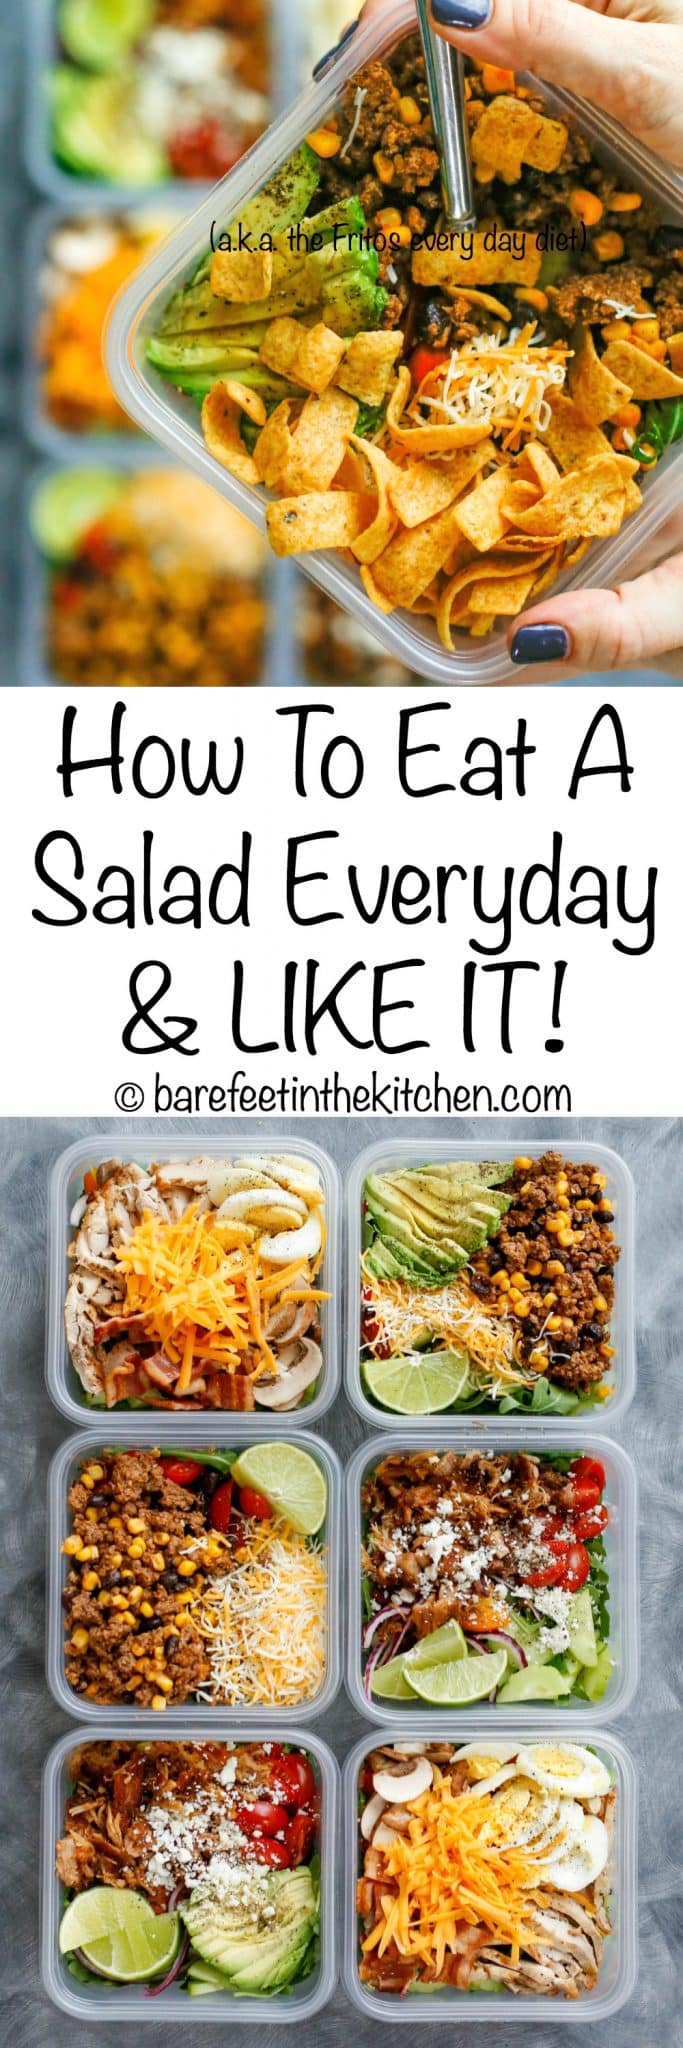 How To Eat Salad Every Day And Like It!